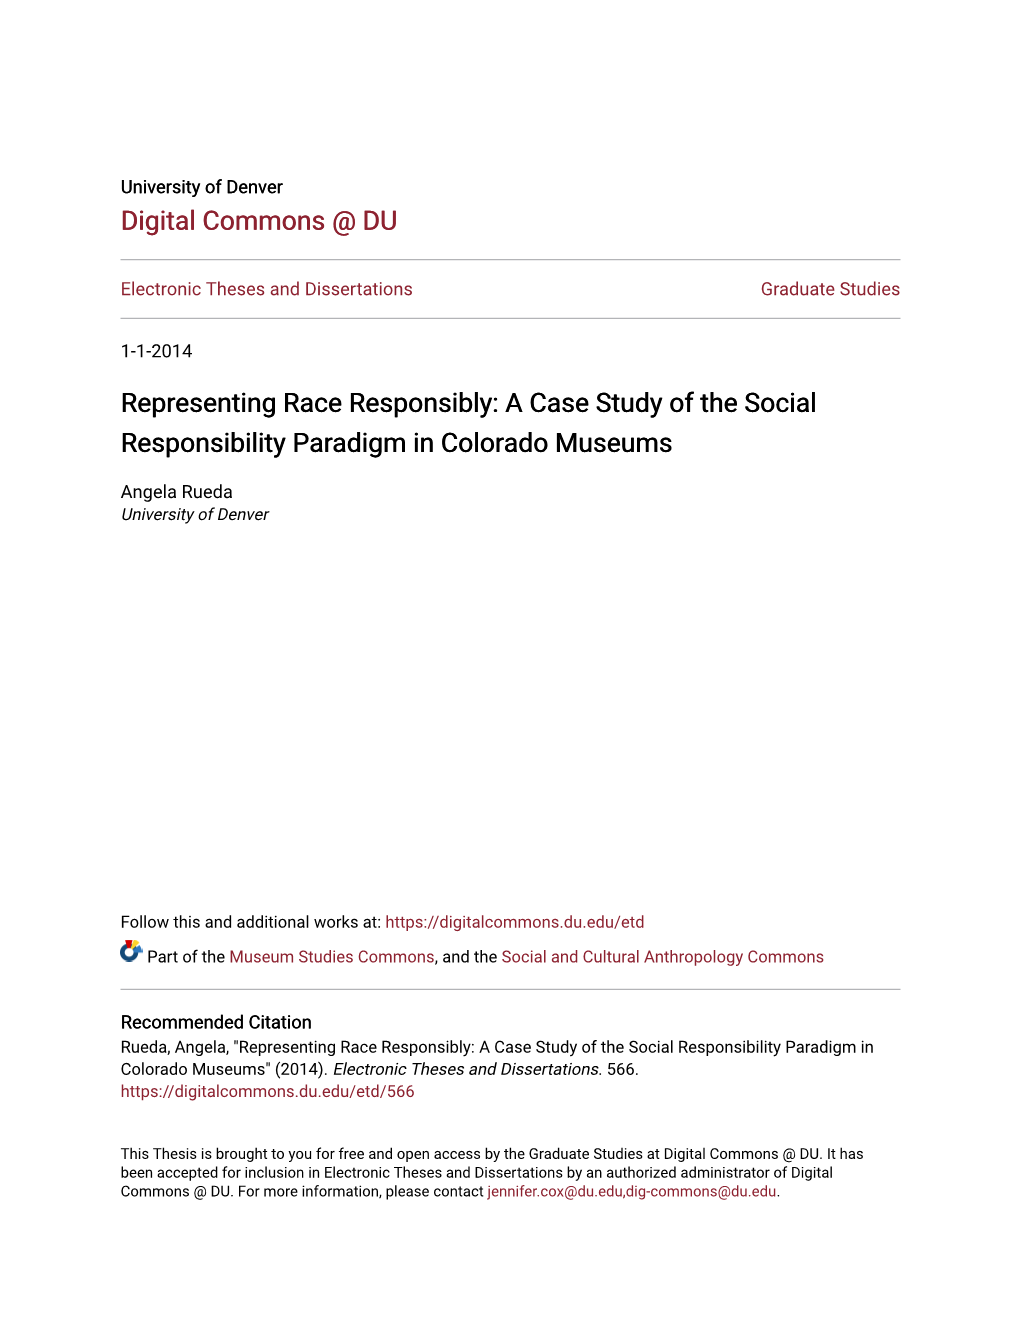 A Case Study of the Social Responsibility Paradigm in Colorado Museums